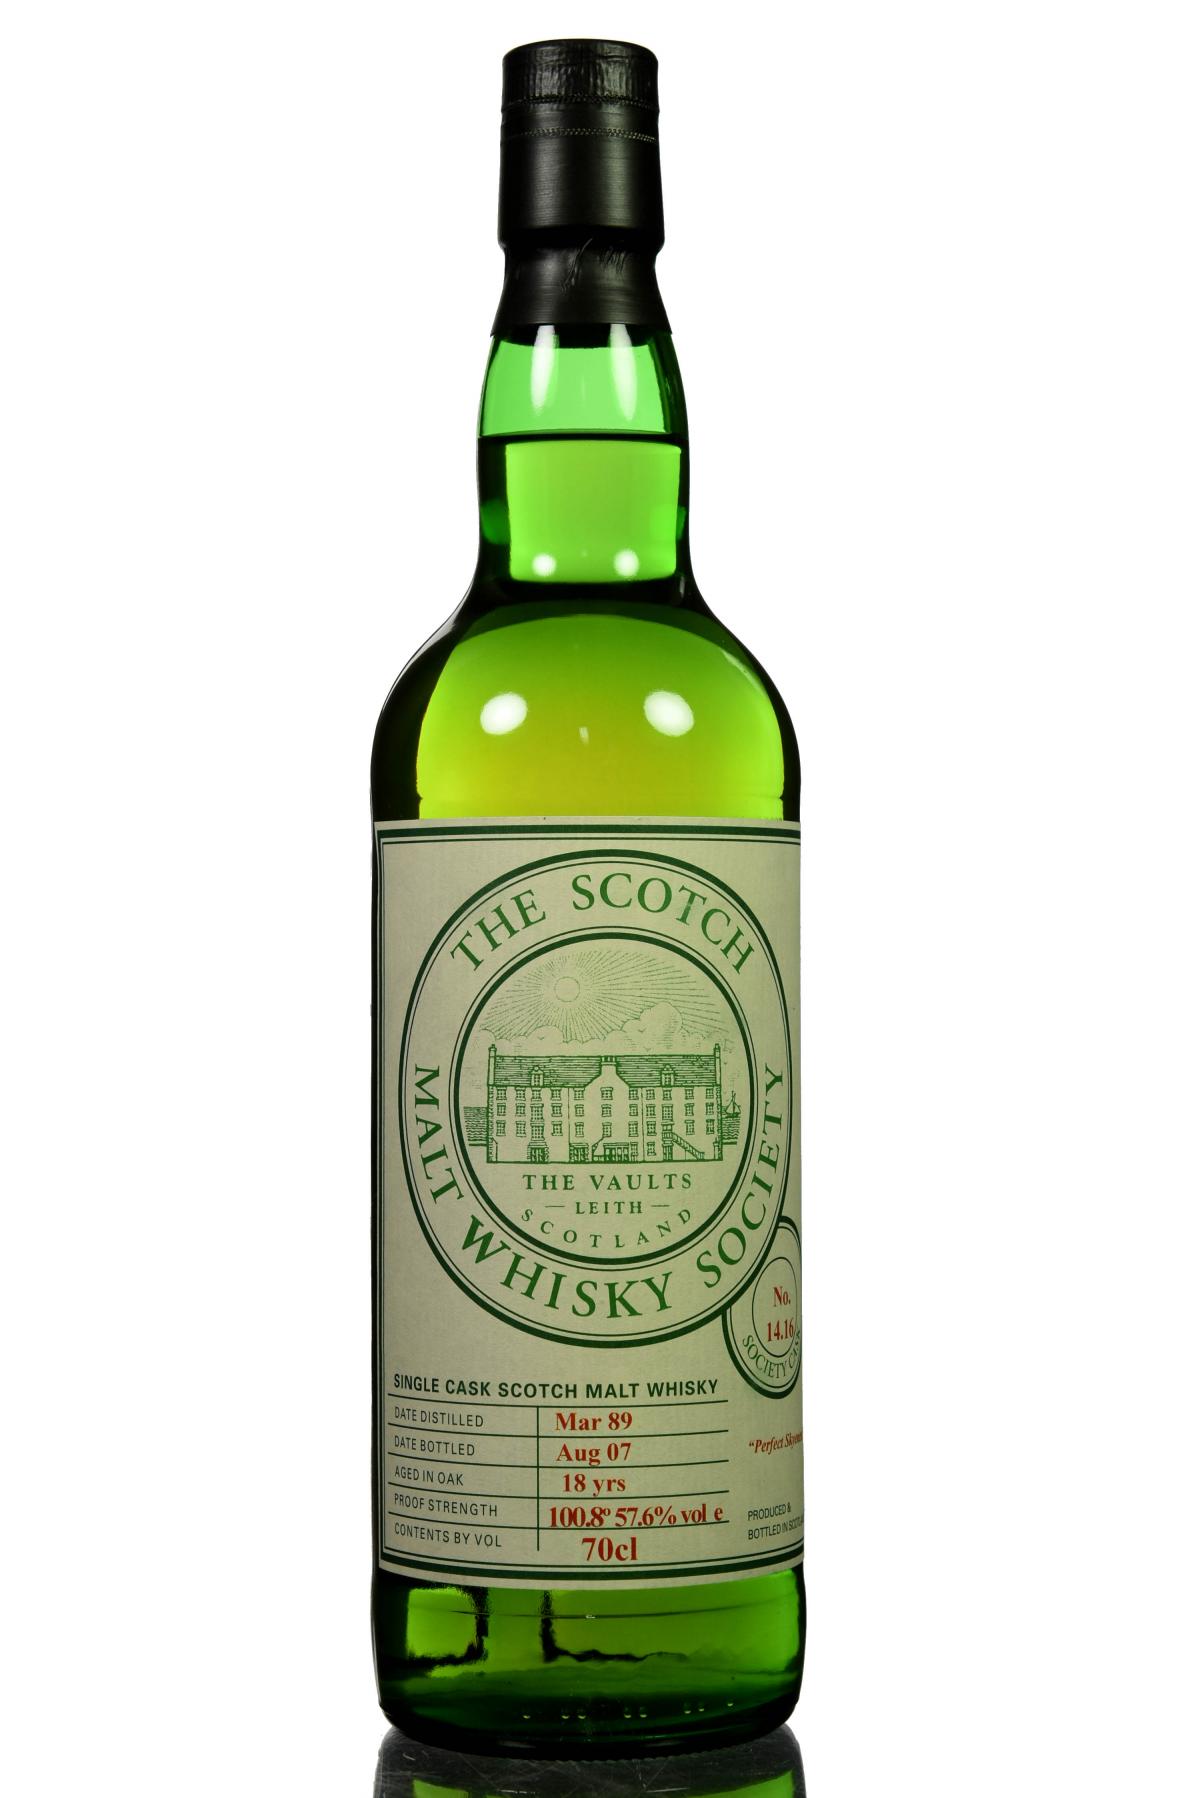 Talisker 1989-2007 - 18 Year Old - SMWS 14.16